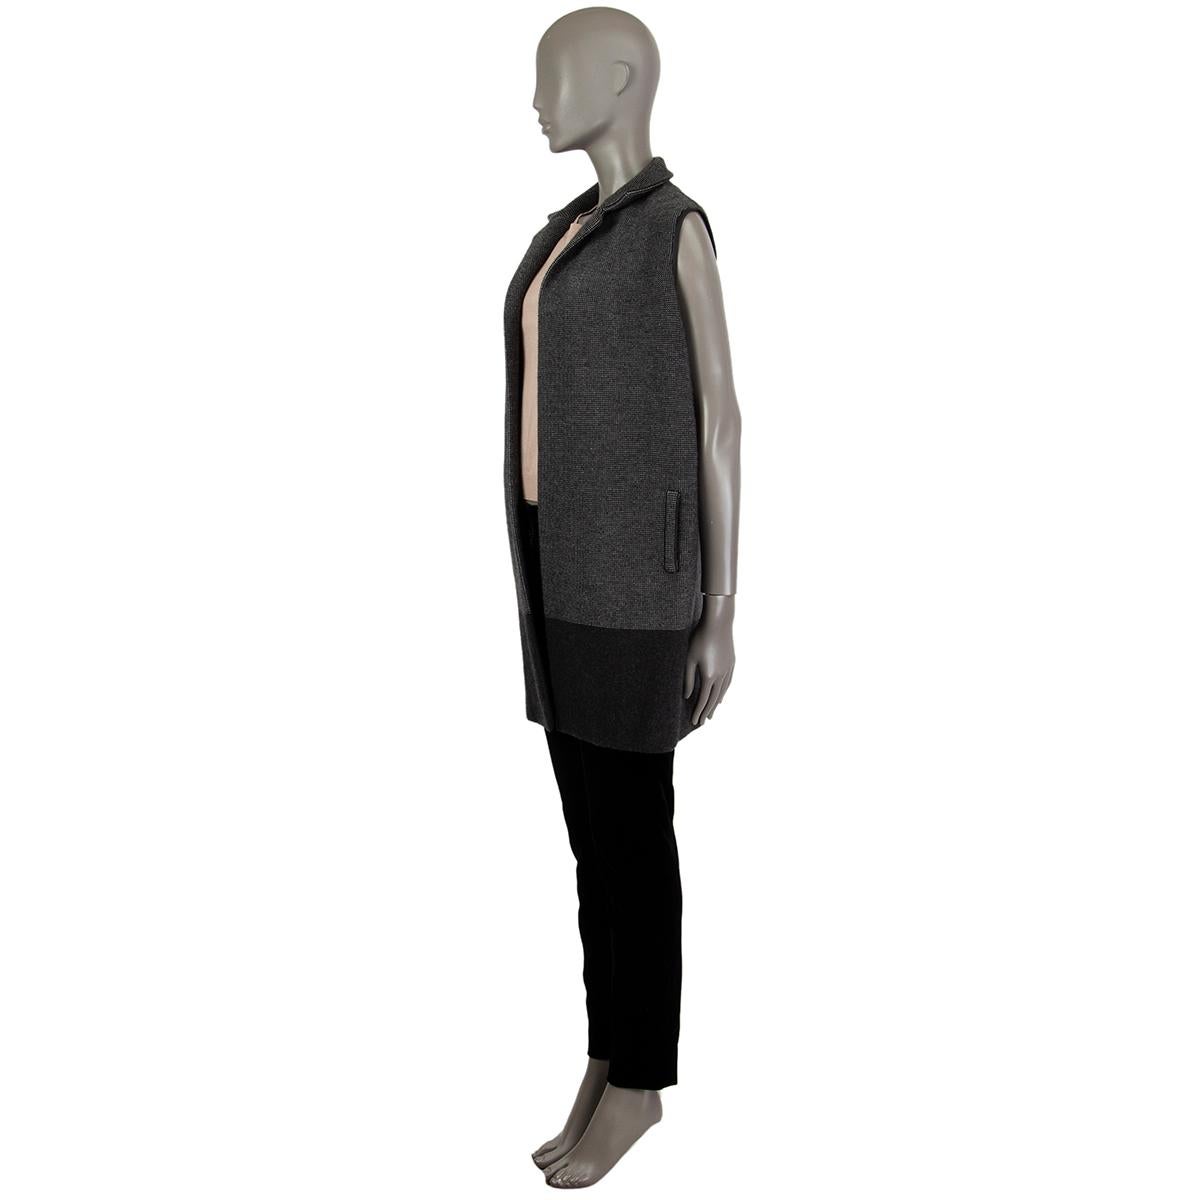 Loro Piana long open sleeveless cardigan in anthracite and white cashmere (96%) polyester (5%) with an optical dotted knit-style, classic collar, leather trim around the shoulders and two slit-pockets in the front. Unlined. Has been worn and is in